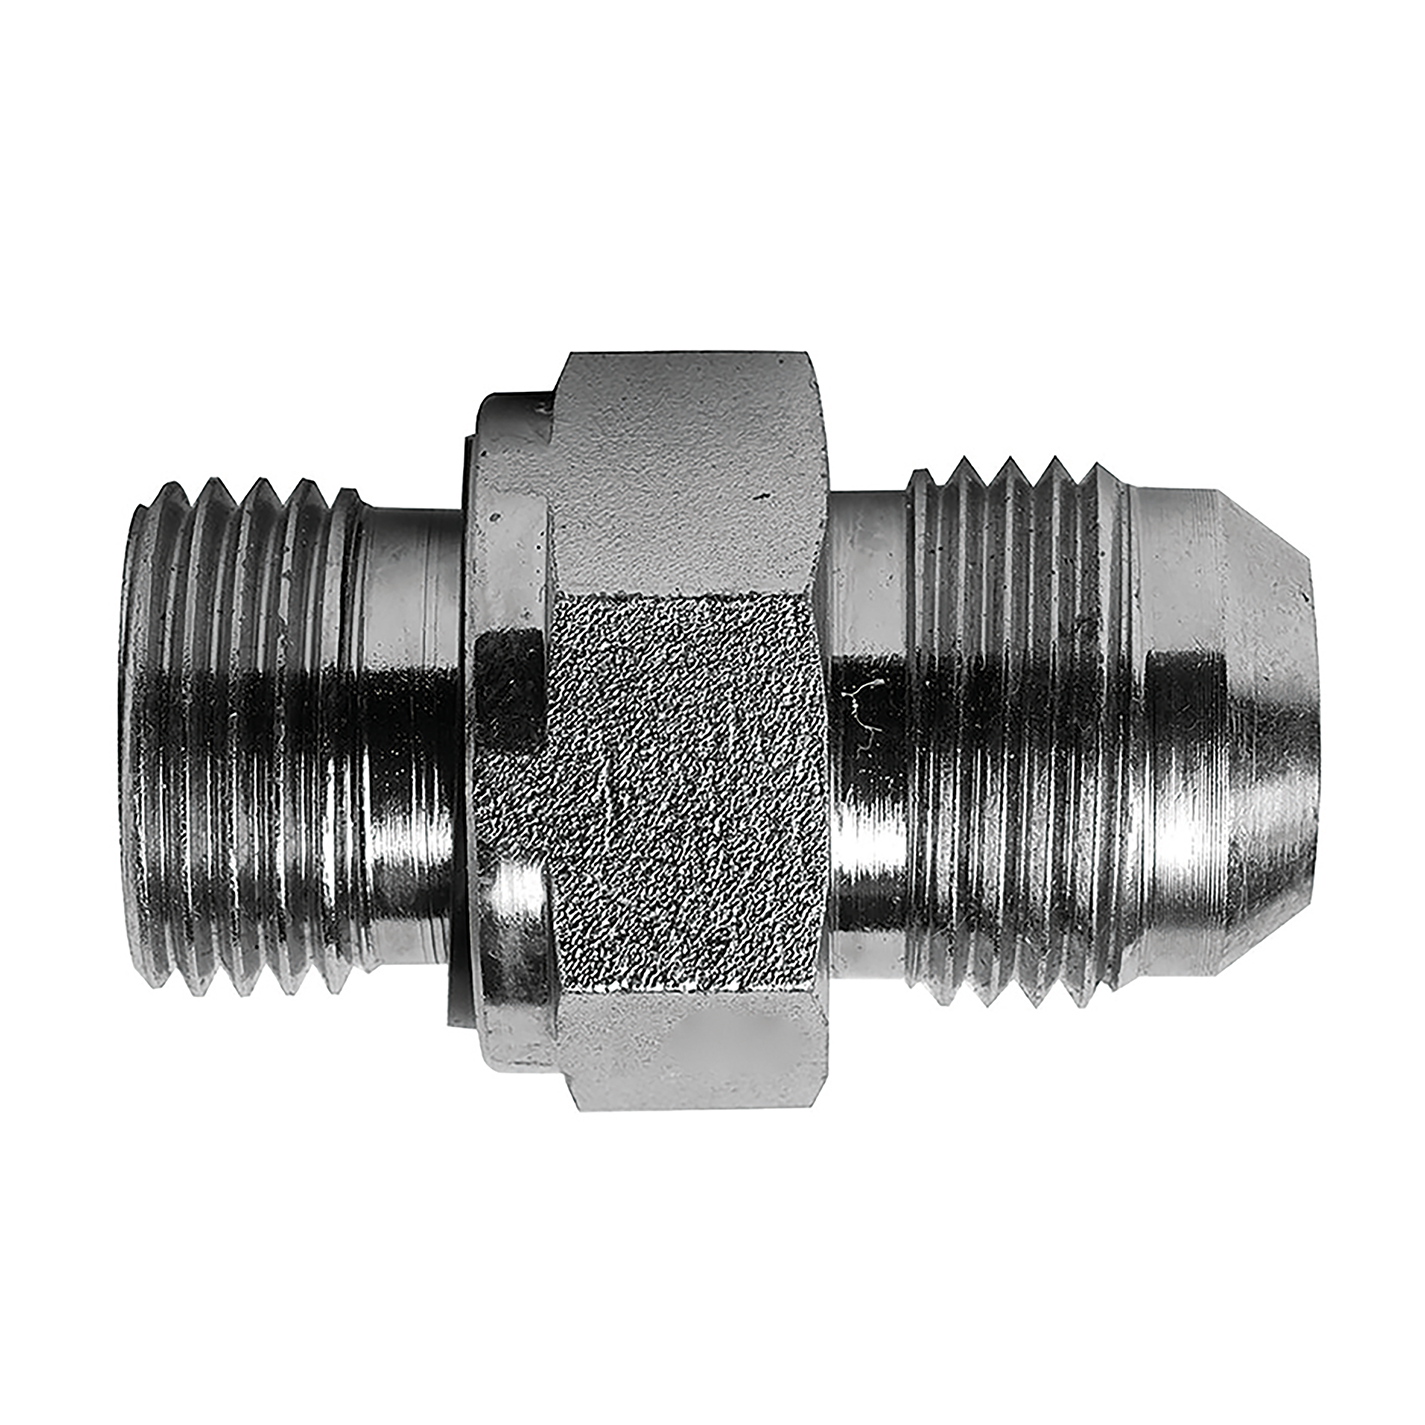 3/8" BSPP Malex9/16" JIC Male Adaptor with Seal